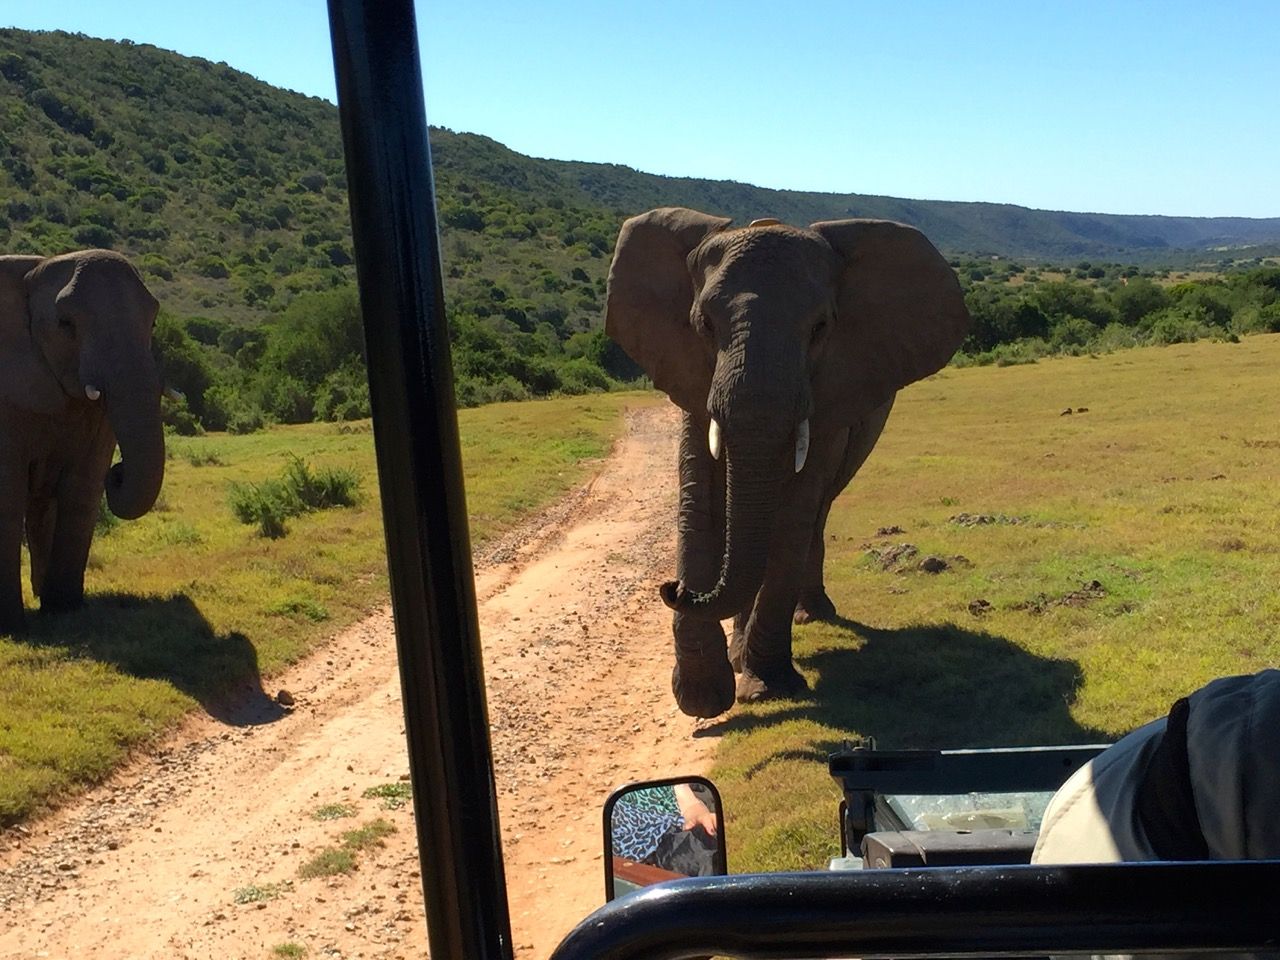 An elephant approaching our vehicle.